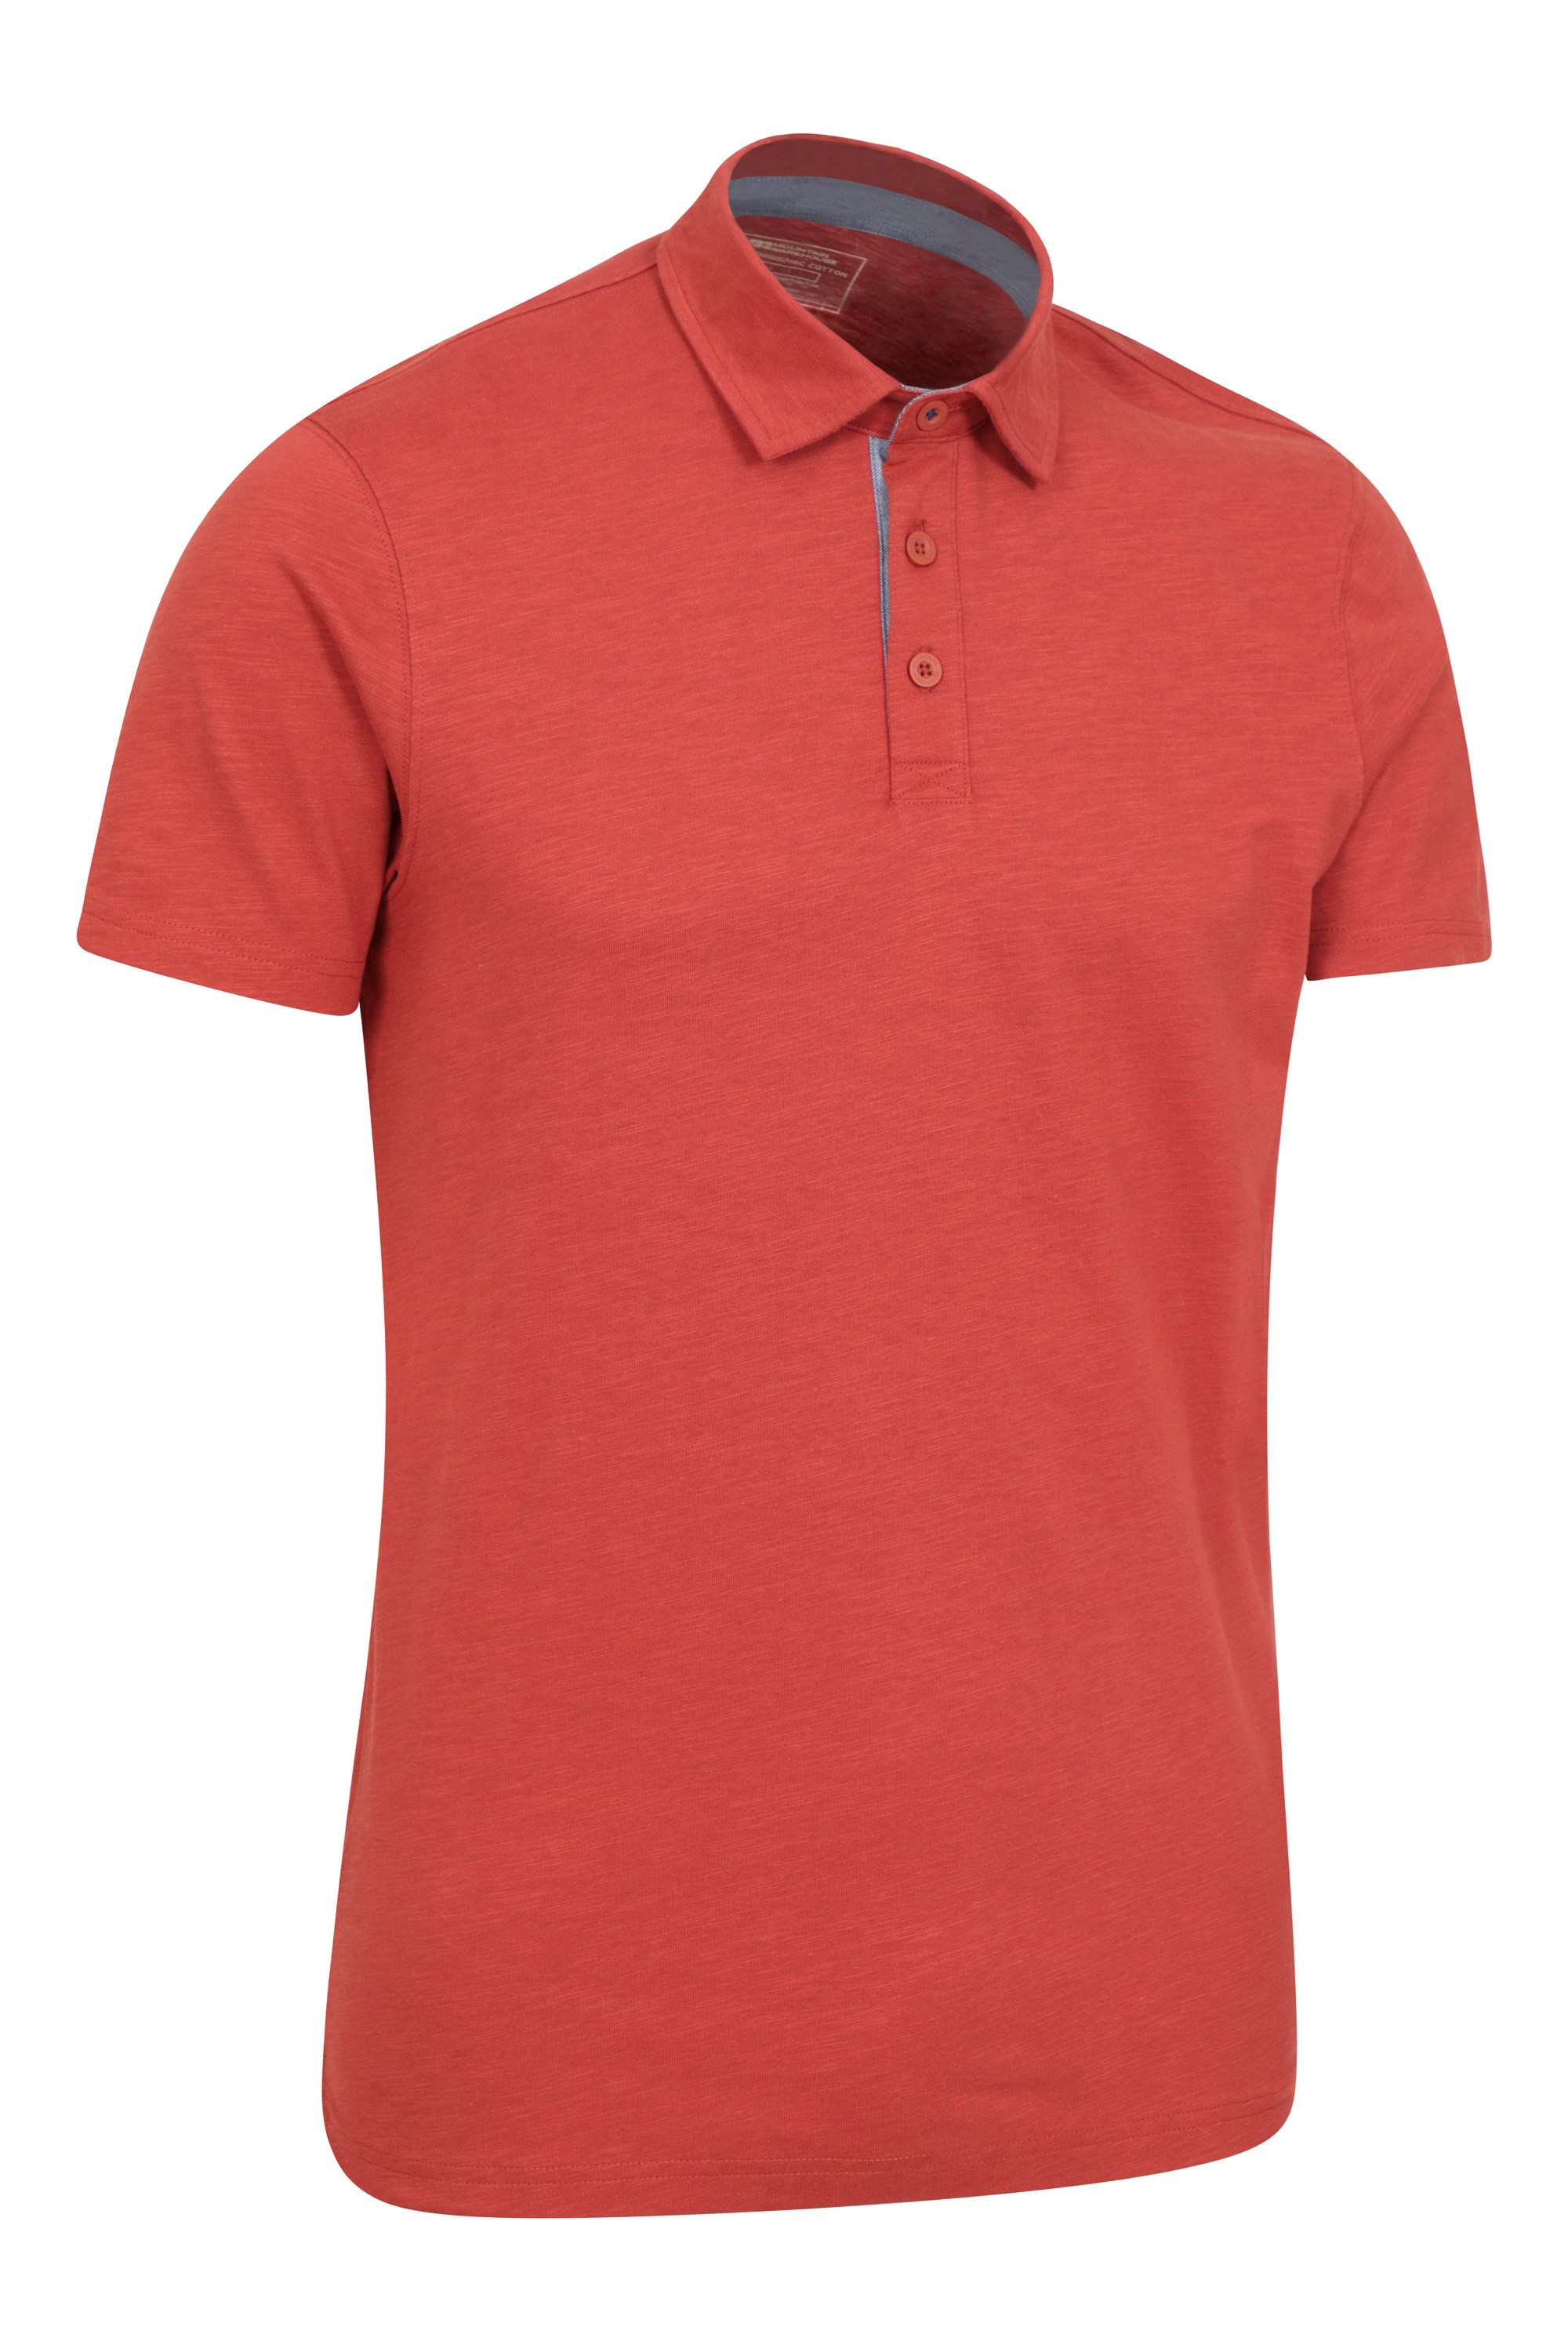 Hasst Ii Mens Organic Polo - Red